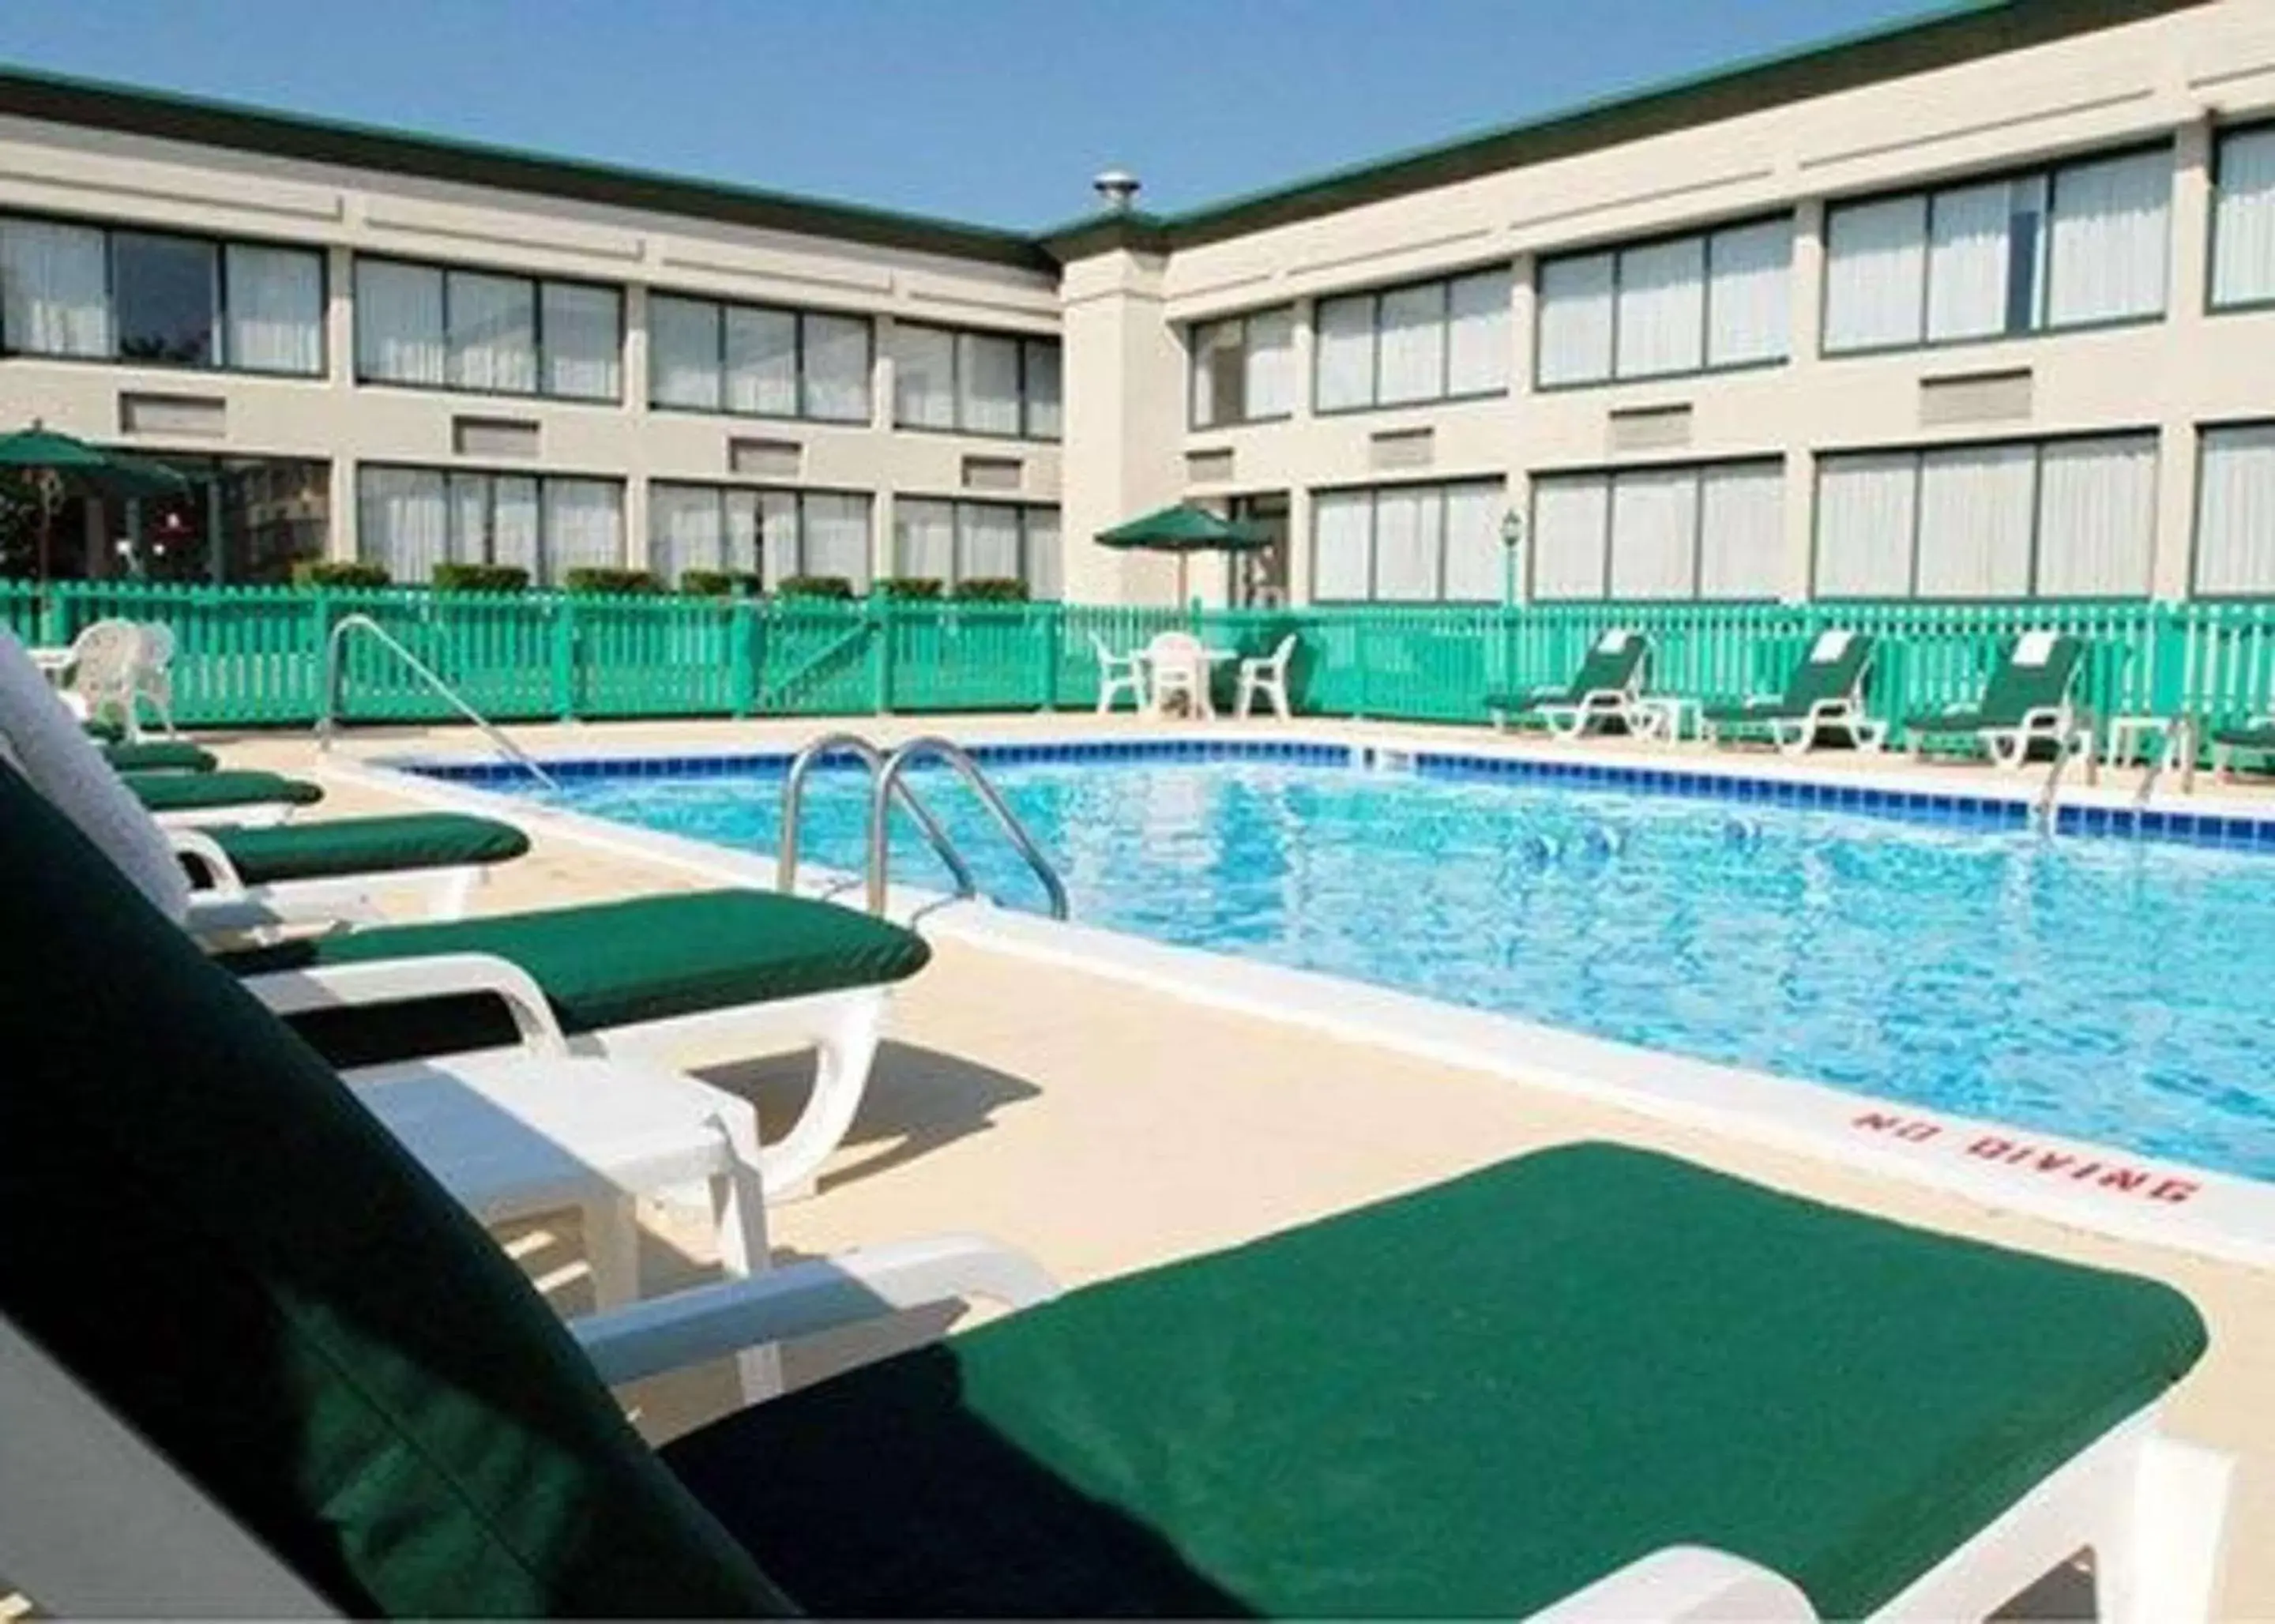 On site, Swimming Pool in Quality Inn Beckley